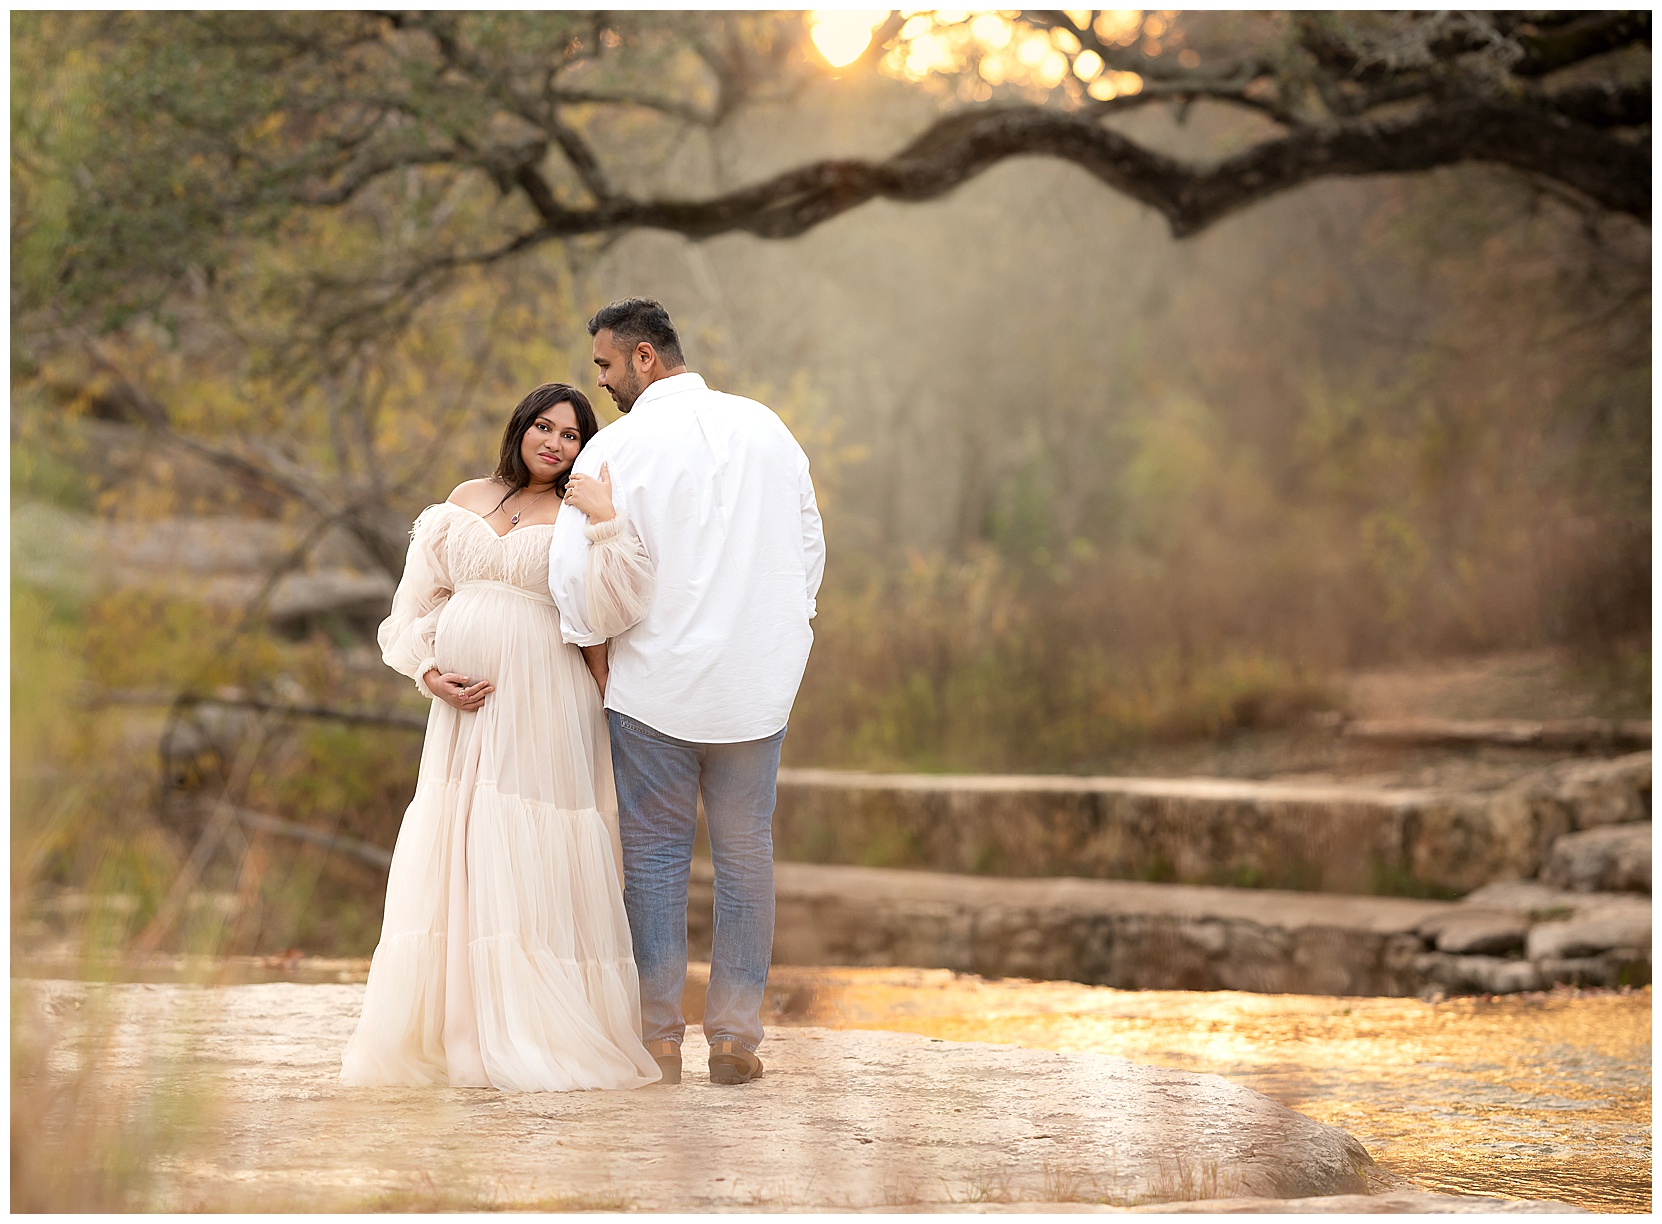 Austin TX maternity photo with Bull Creek in the background. Features a woman in a long, white dress facing the camera. She is holding the arm of her husband, who is wearing a white button-down shirt and jeans. He is facing away from the camera, with his head tilted sidewards toward her. 